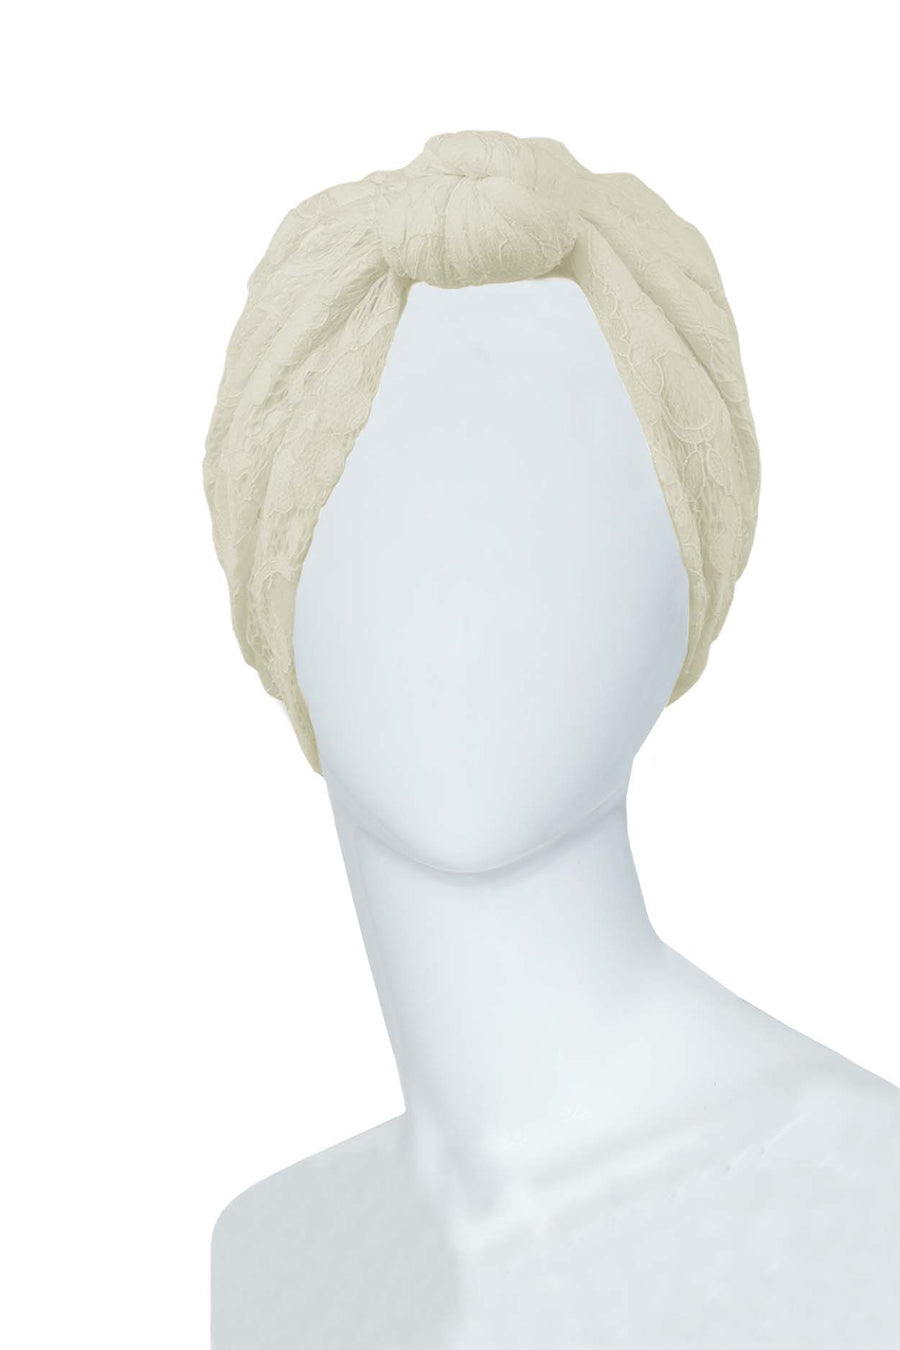 Dentelle lace cream knotted turban